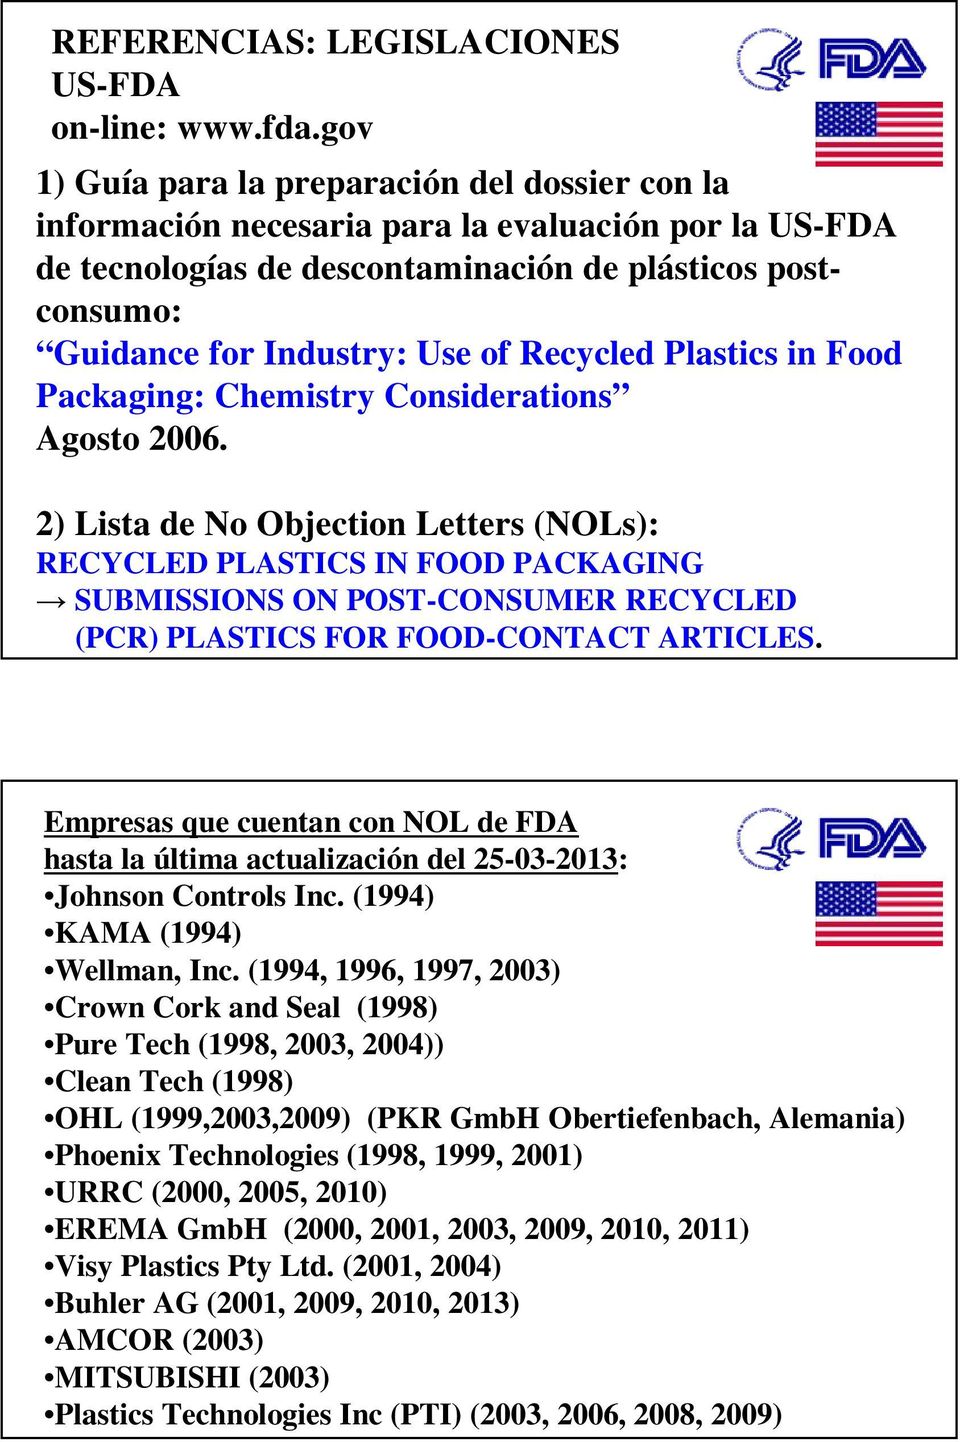 Recycled Plastics in Food Packaging: Chemistry Considerations Agosto 2006.